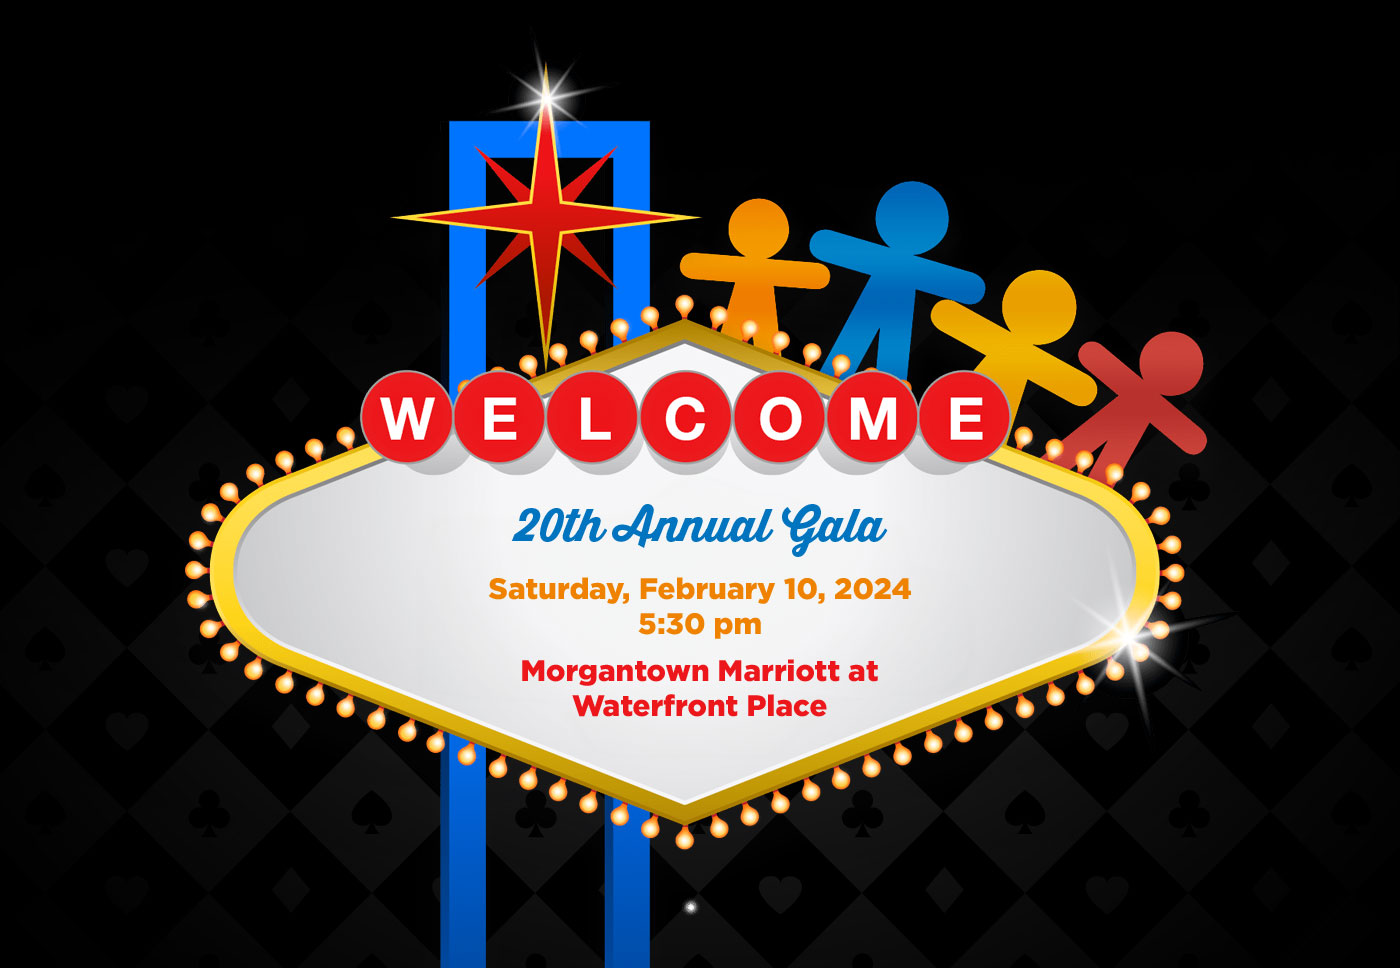 Gala Details: Saturday, February 10th, 2024 at 5:30pm. Morgantown Marriott at Waterfront Place.